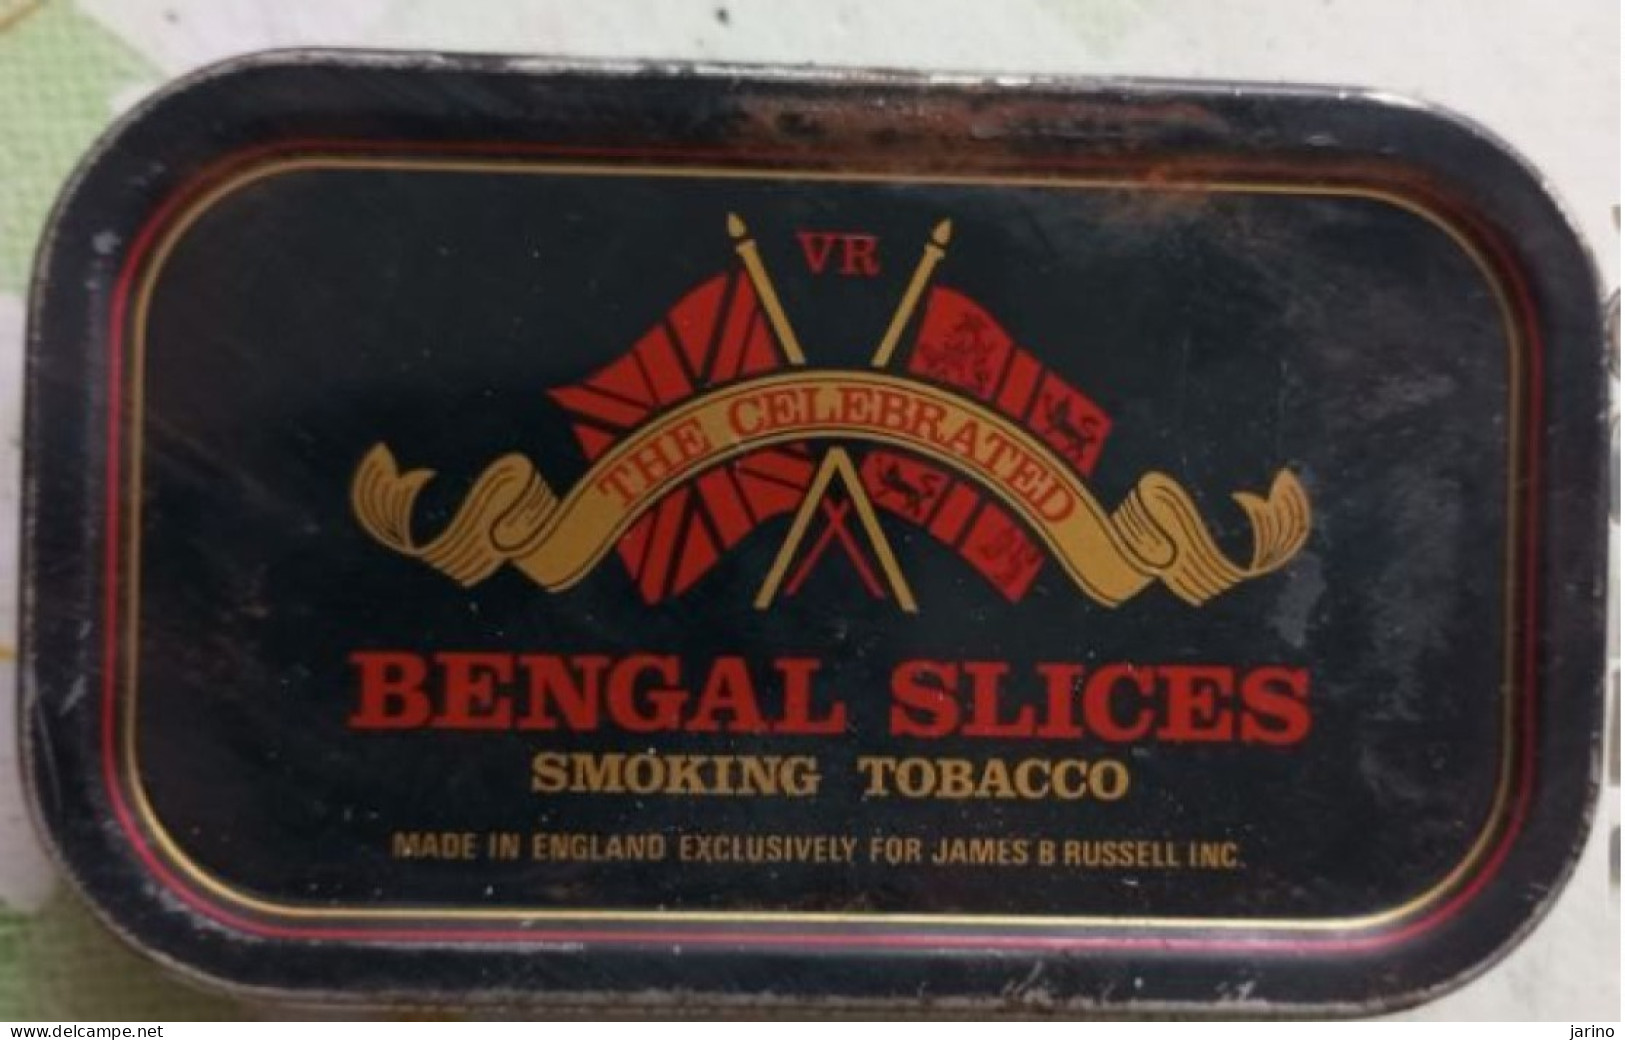 Ancient Empty Metal Tobacco Box The Celebrate BENGAL SLICES Smoking Tobacco,Made In England For Russell INC 9,5x5,5x2cm - Boites à Tabac Vides